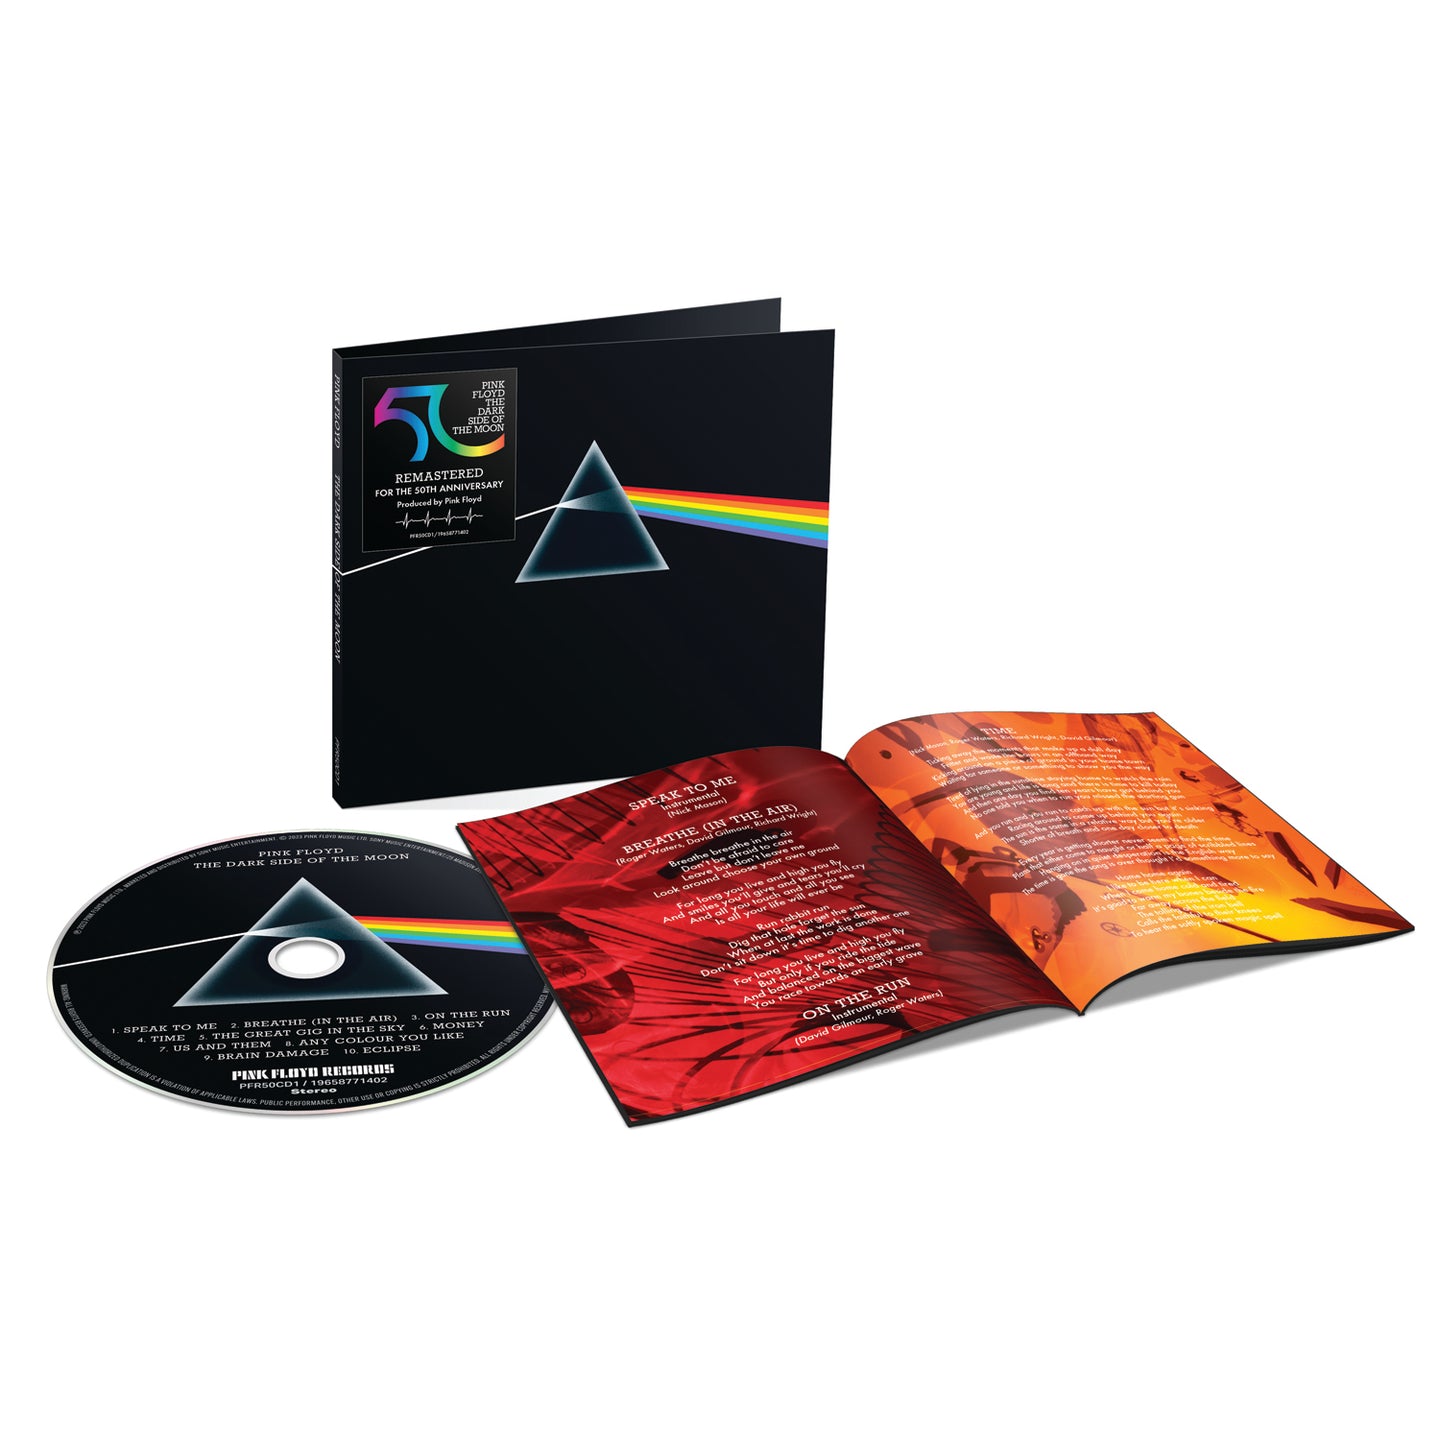 The Dark Side Of The Moon (Remastered) CD